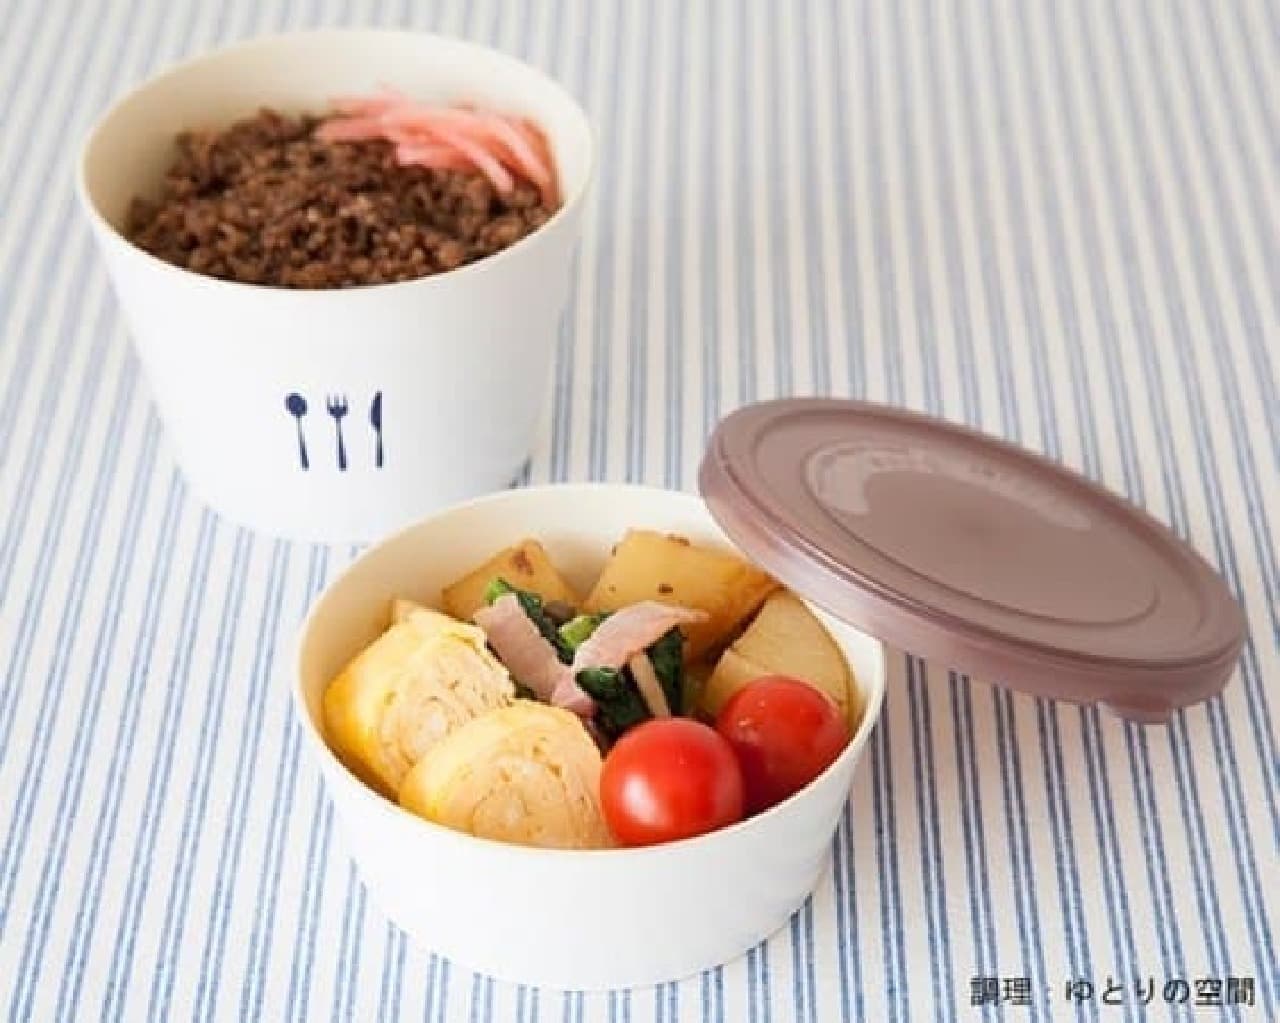 "Cup lunch cutlery" that can be carried by stacking two cups 2,160 yen